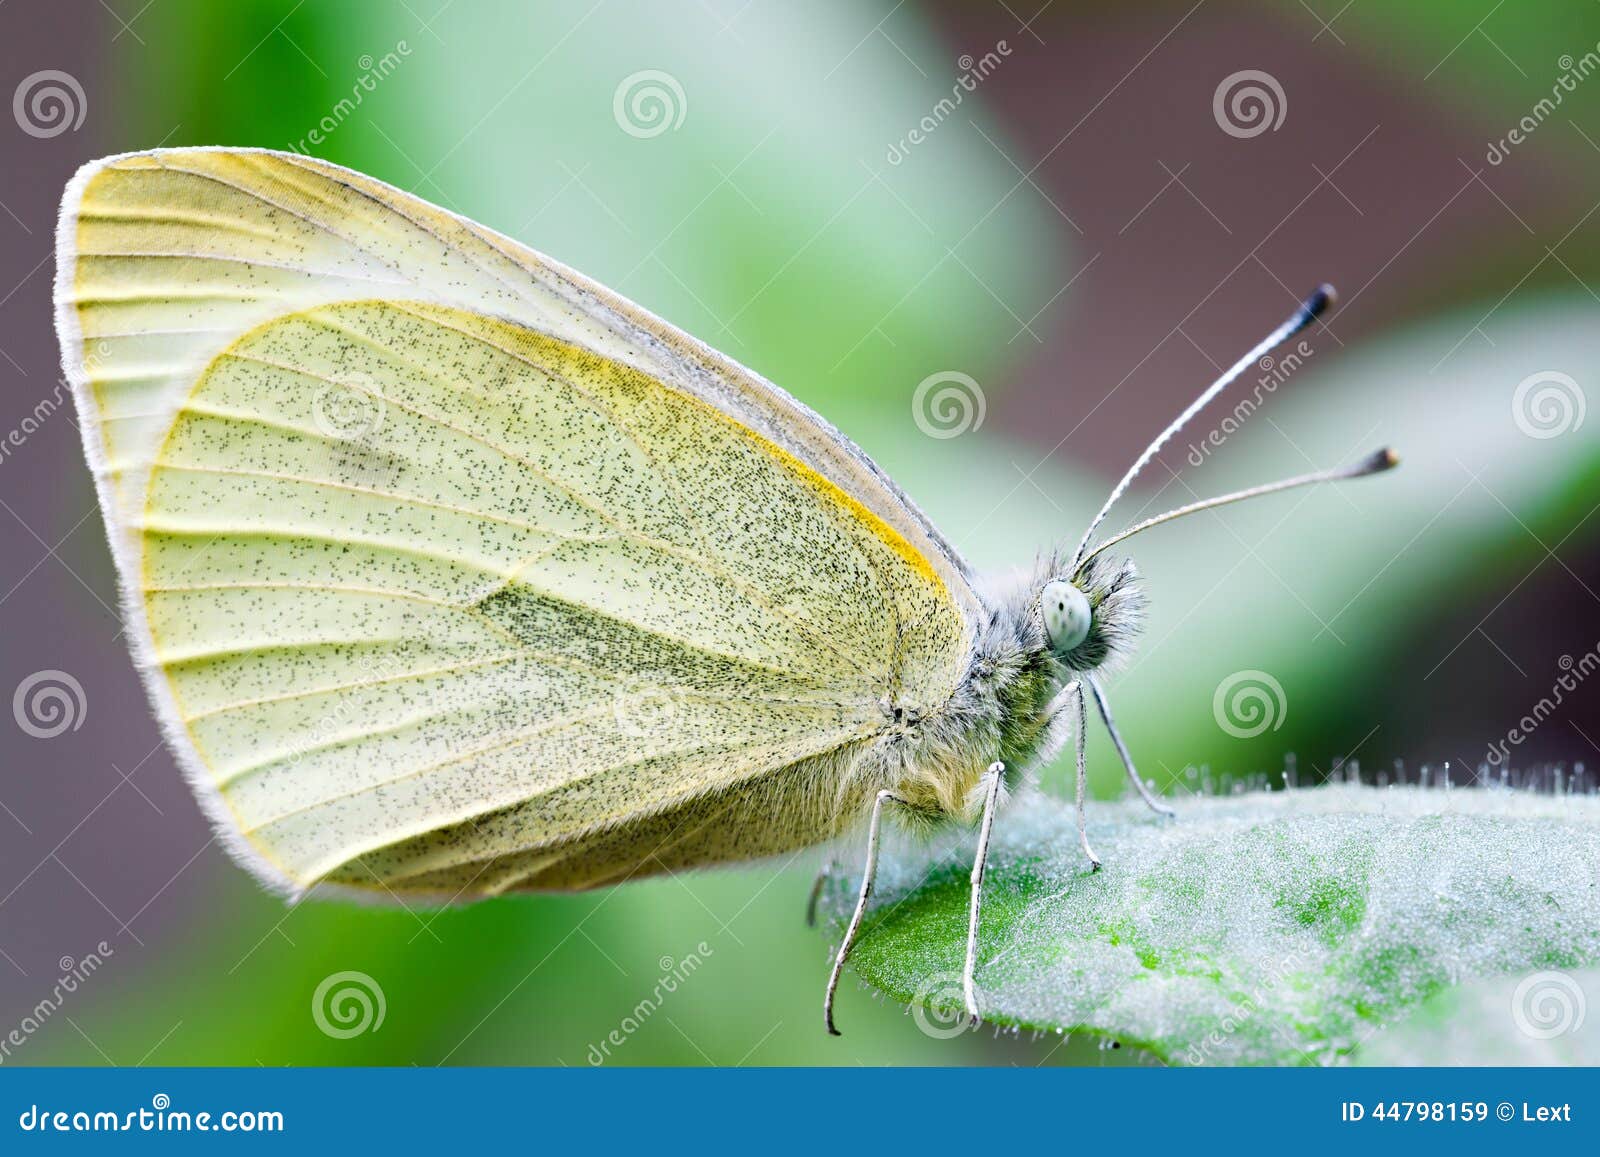 butterfly pollinating a flower. pieridae